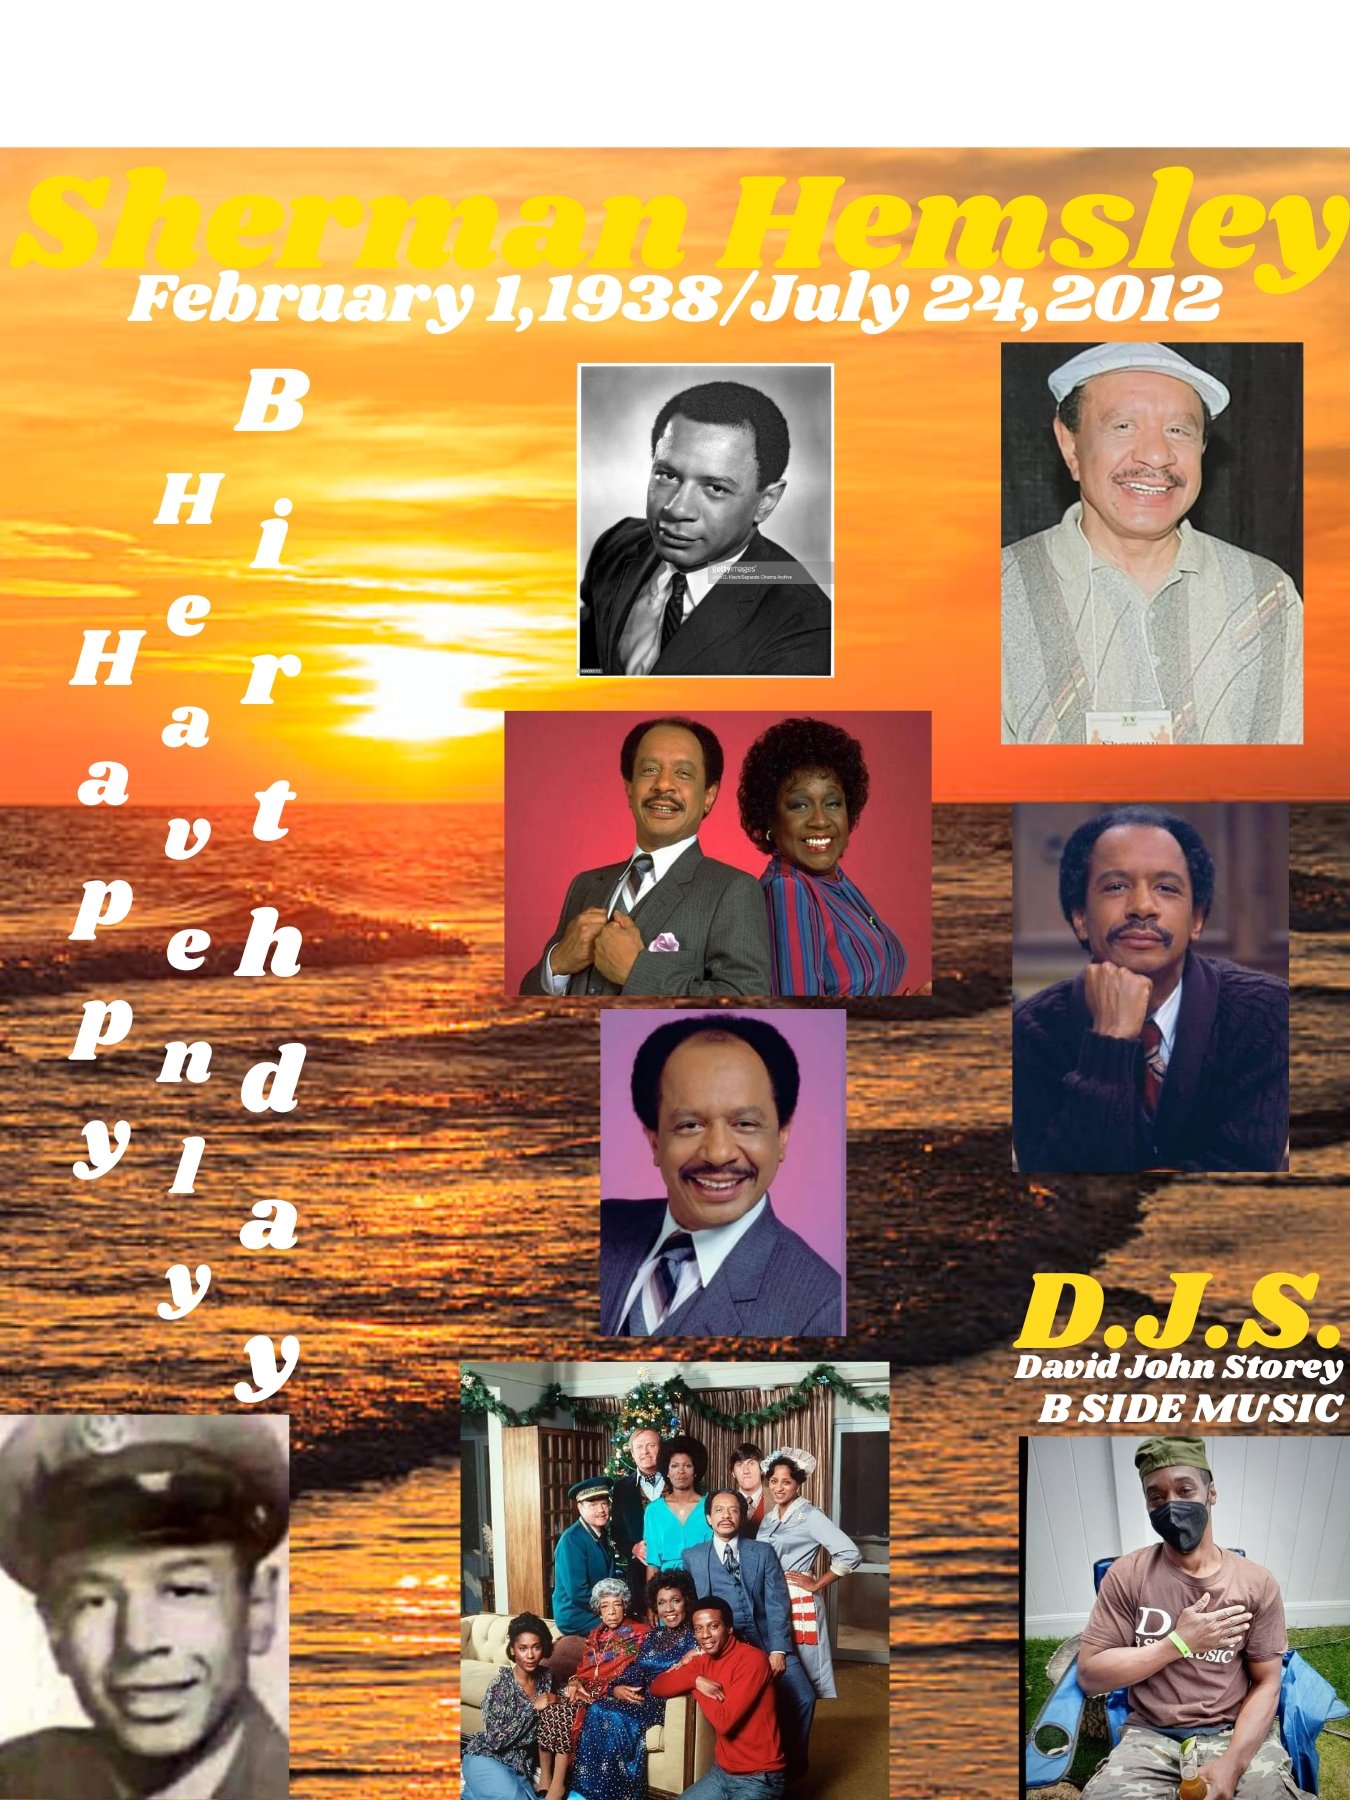 I(D.J.S.)\"B SIDE\" taking time to say Happy Heavenly Birthday to Actor: \"SHERMAN HEMSLEY\". 